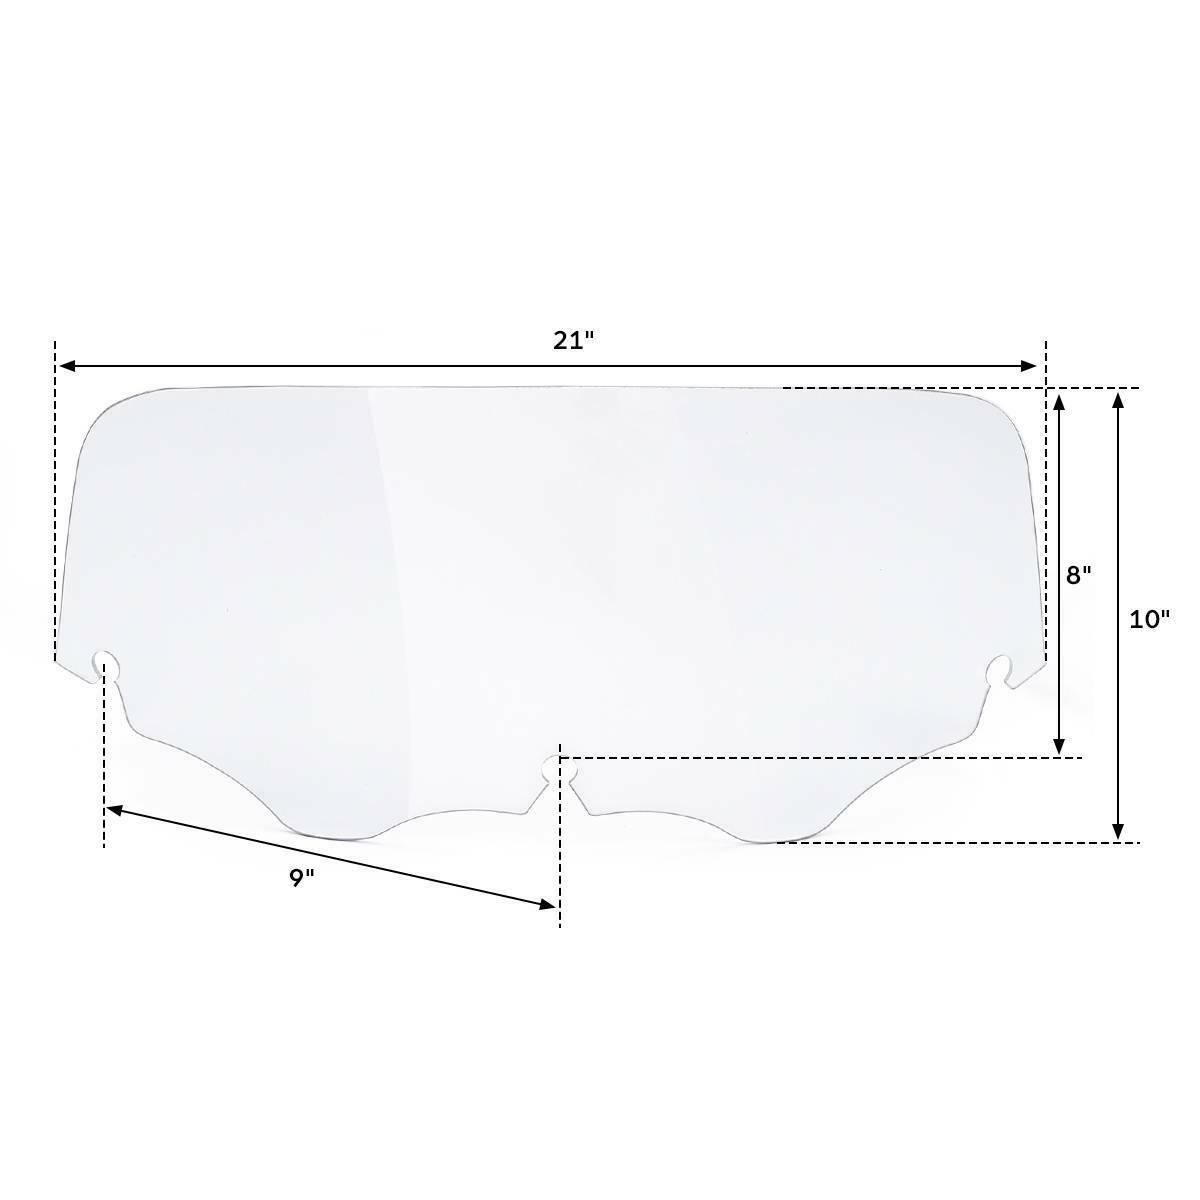 Matte Black Outer Batwing Fairing Windshield Fit For Harley Touring Softail - Moto Life Products